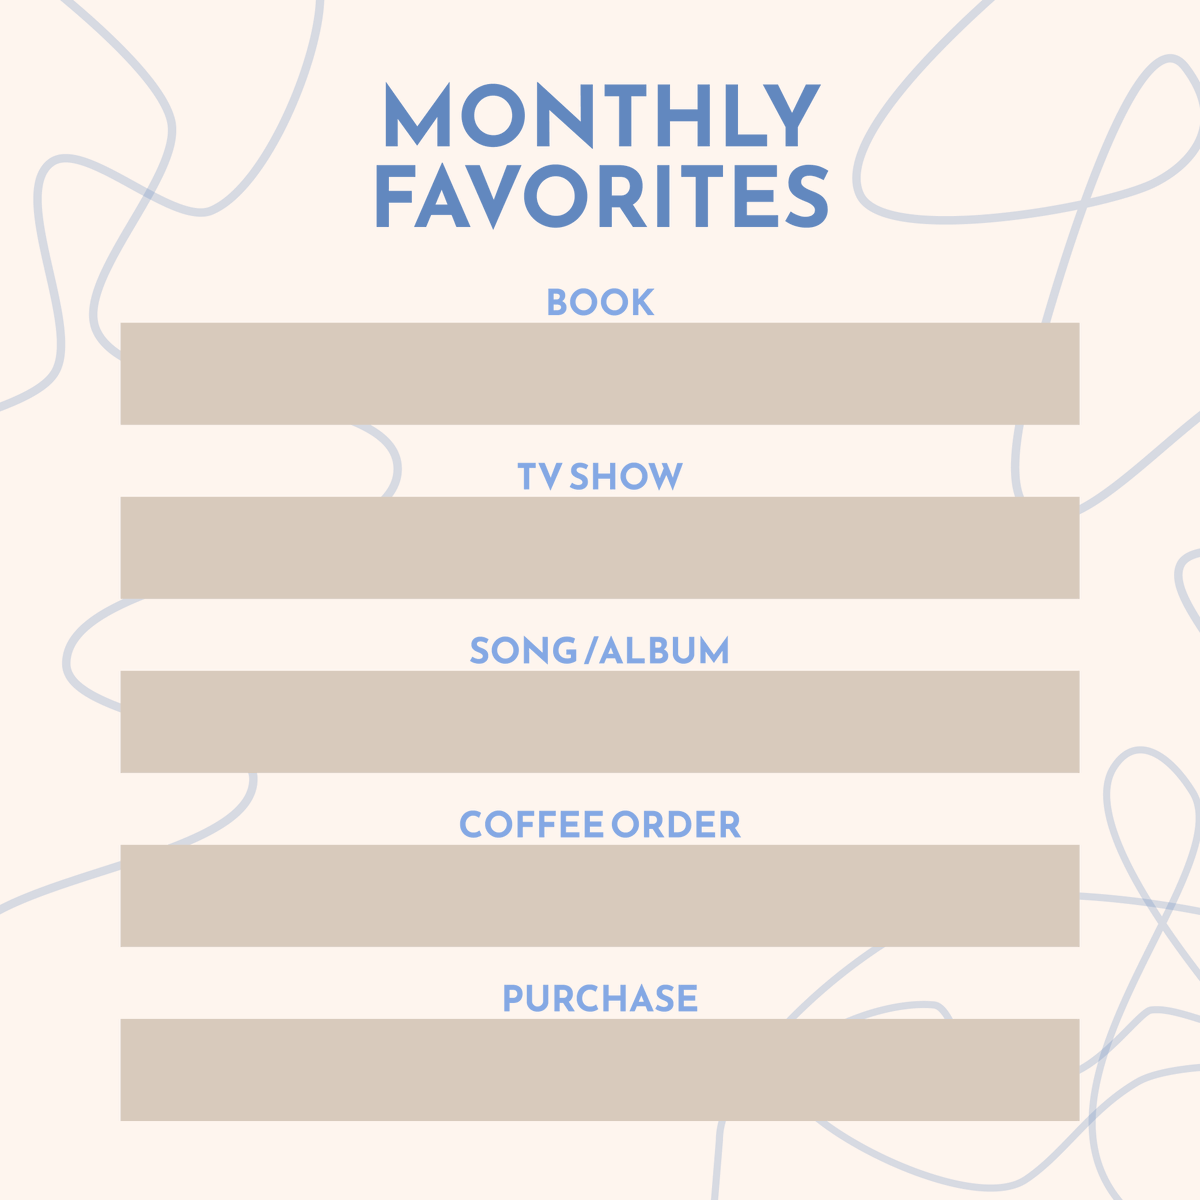 What are a few things you've been loving this month? #MonthlyFavorites
#AlighRightRealtyWestShore #RealStateTampaFlorida #Realtor#Homes #CompraCasa #LaCasaDeTusSuenos